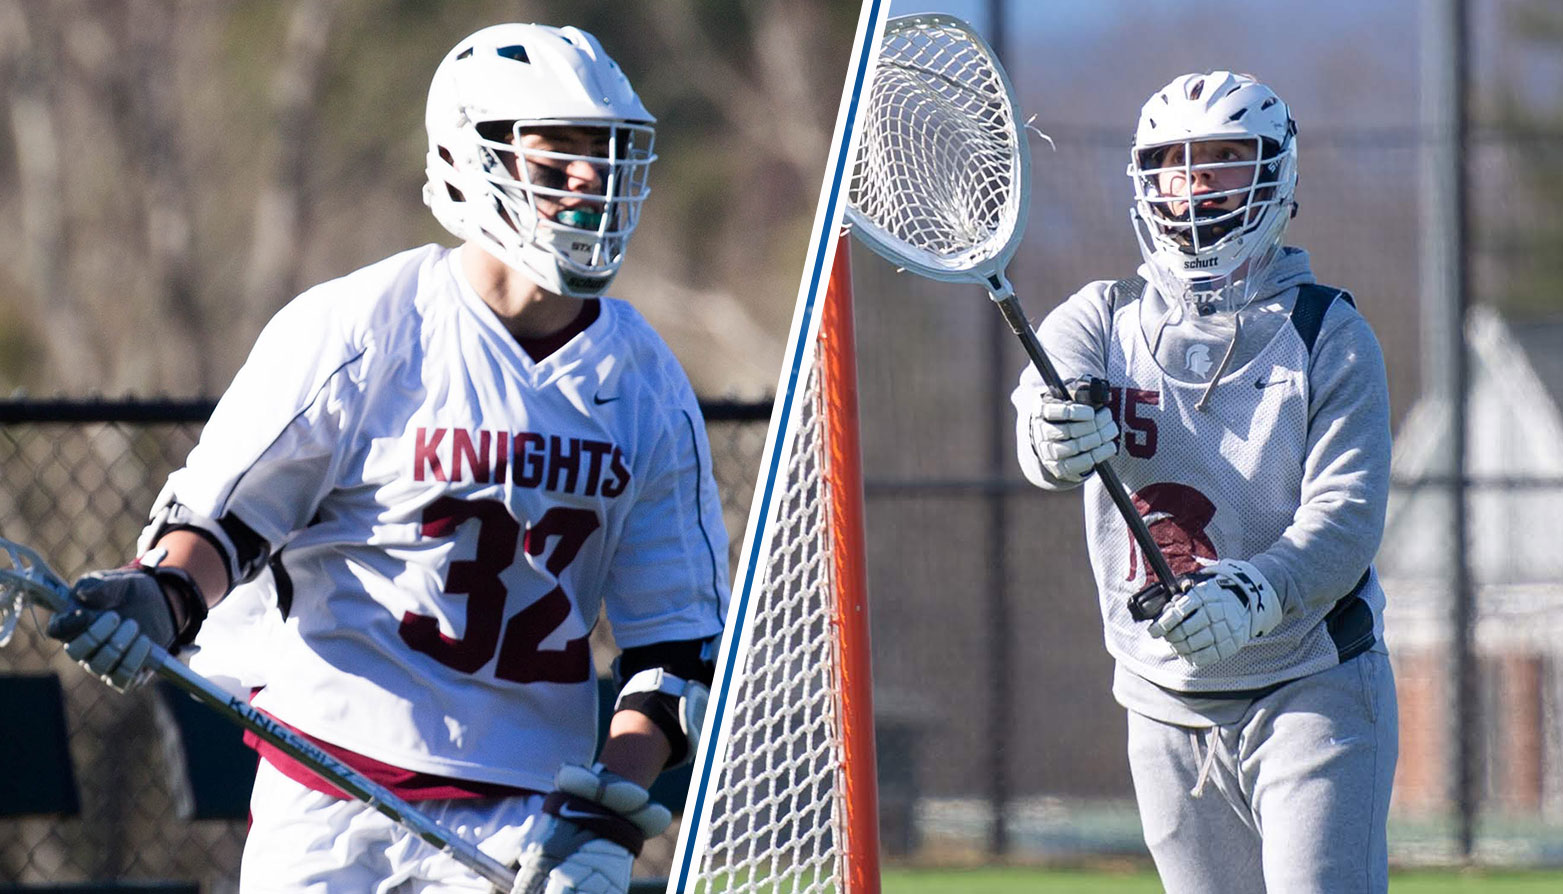 Southern Virginia's Shawn Lamb & Ian Arave Sweep CAC Men's Lacrosse Weekly Accolades